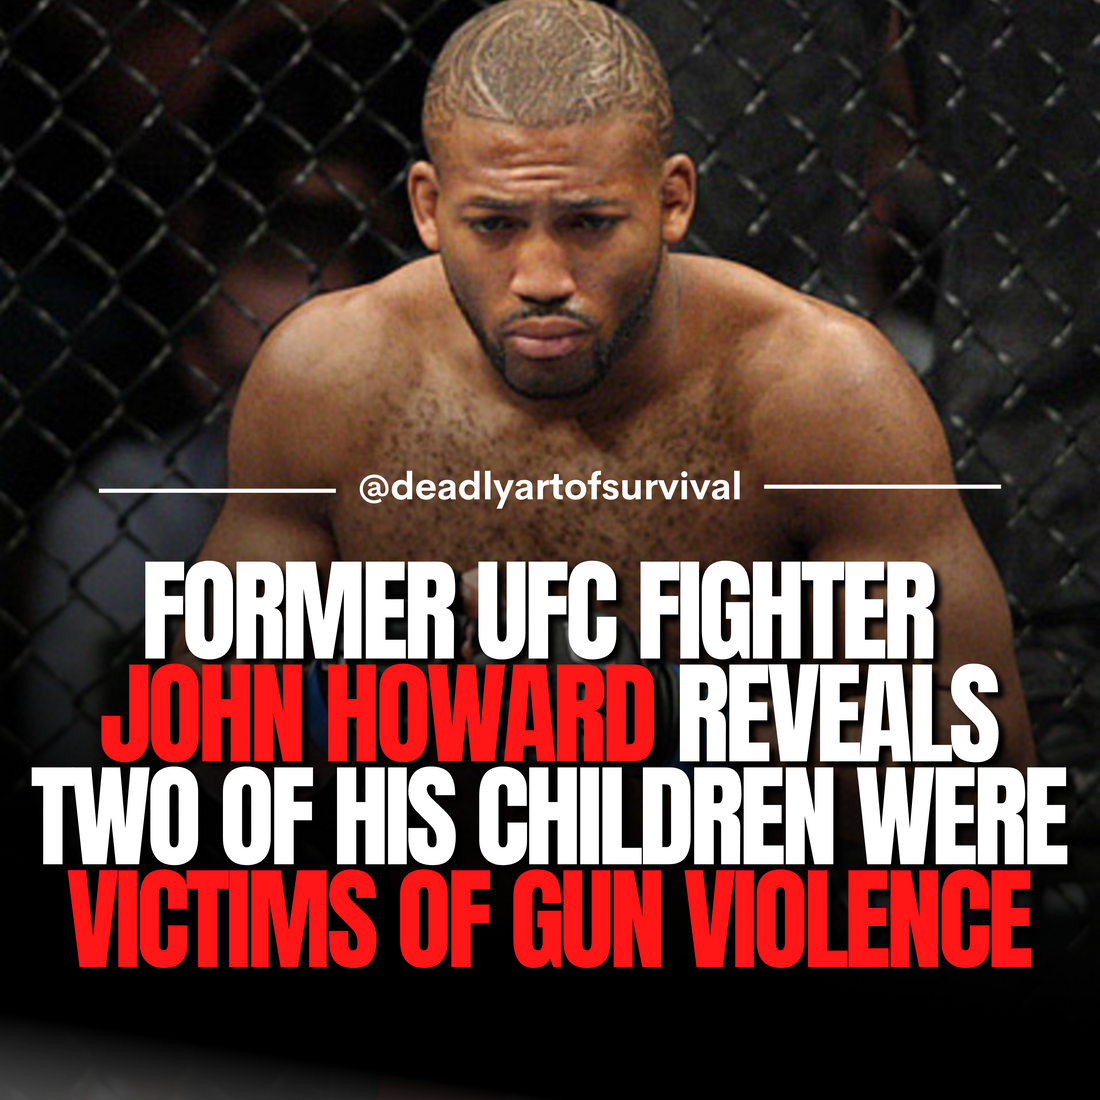 Former UFC Fighter John Howard Shares Heartbreaking Story of His Children as Victims of Gun Violence